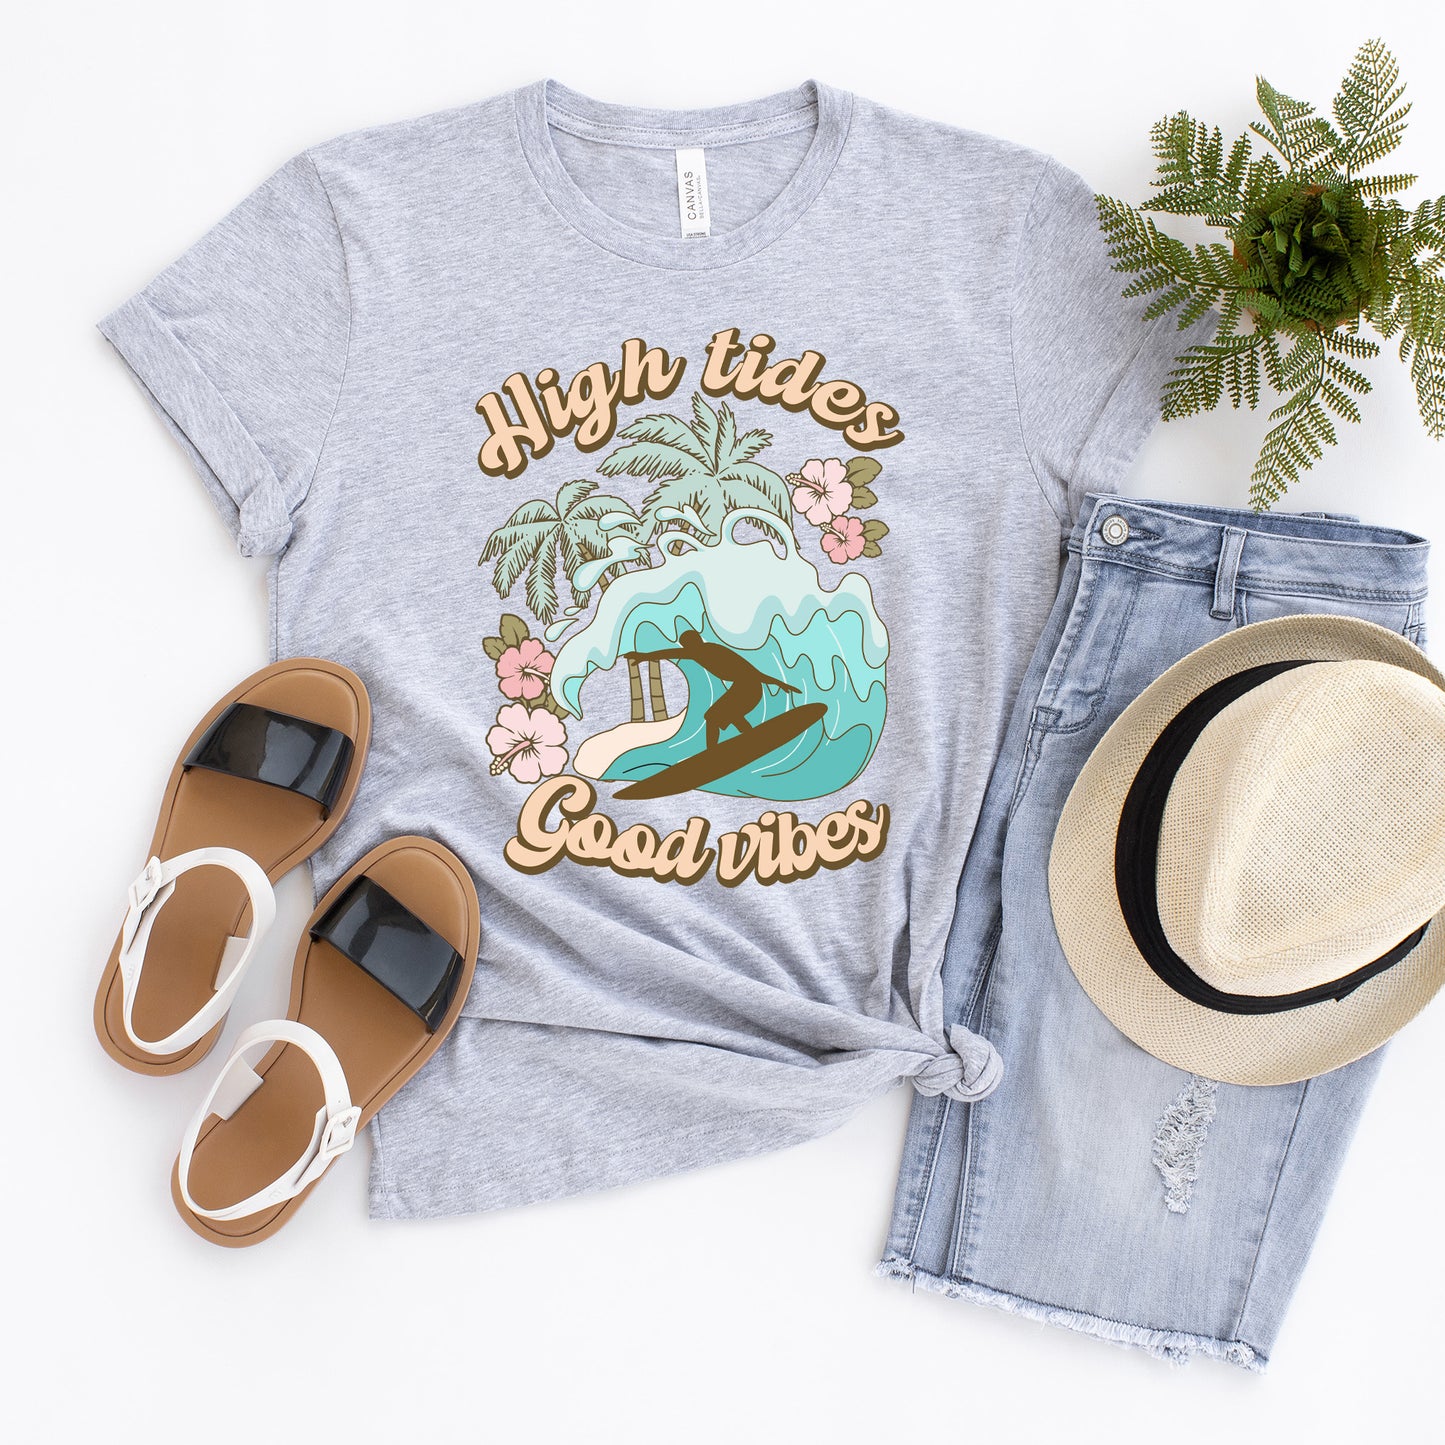 High Tides and Good Vibes Wave | Short Sleeve Crew Neck